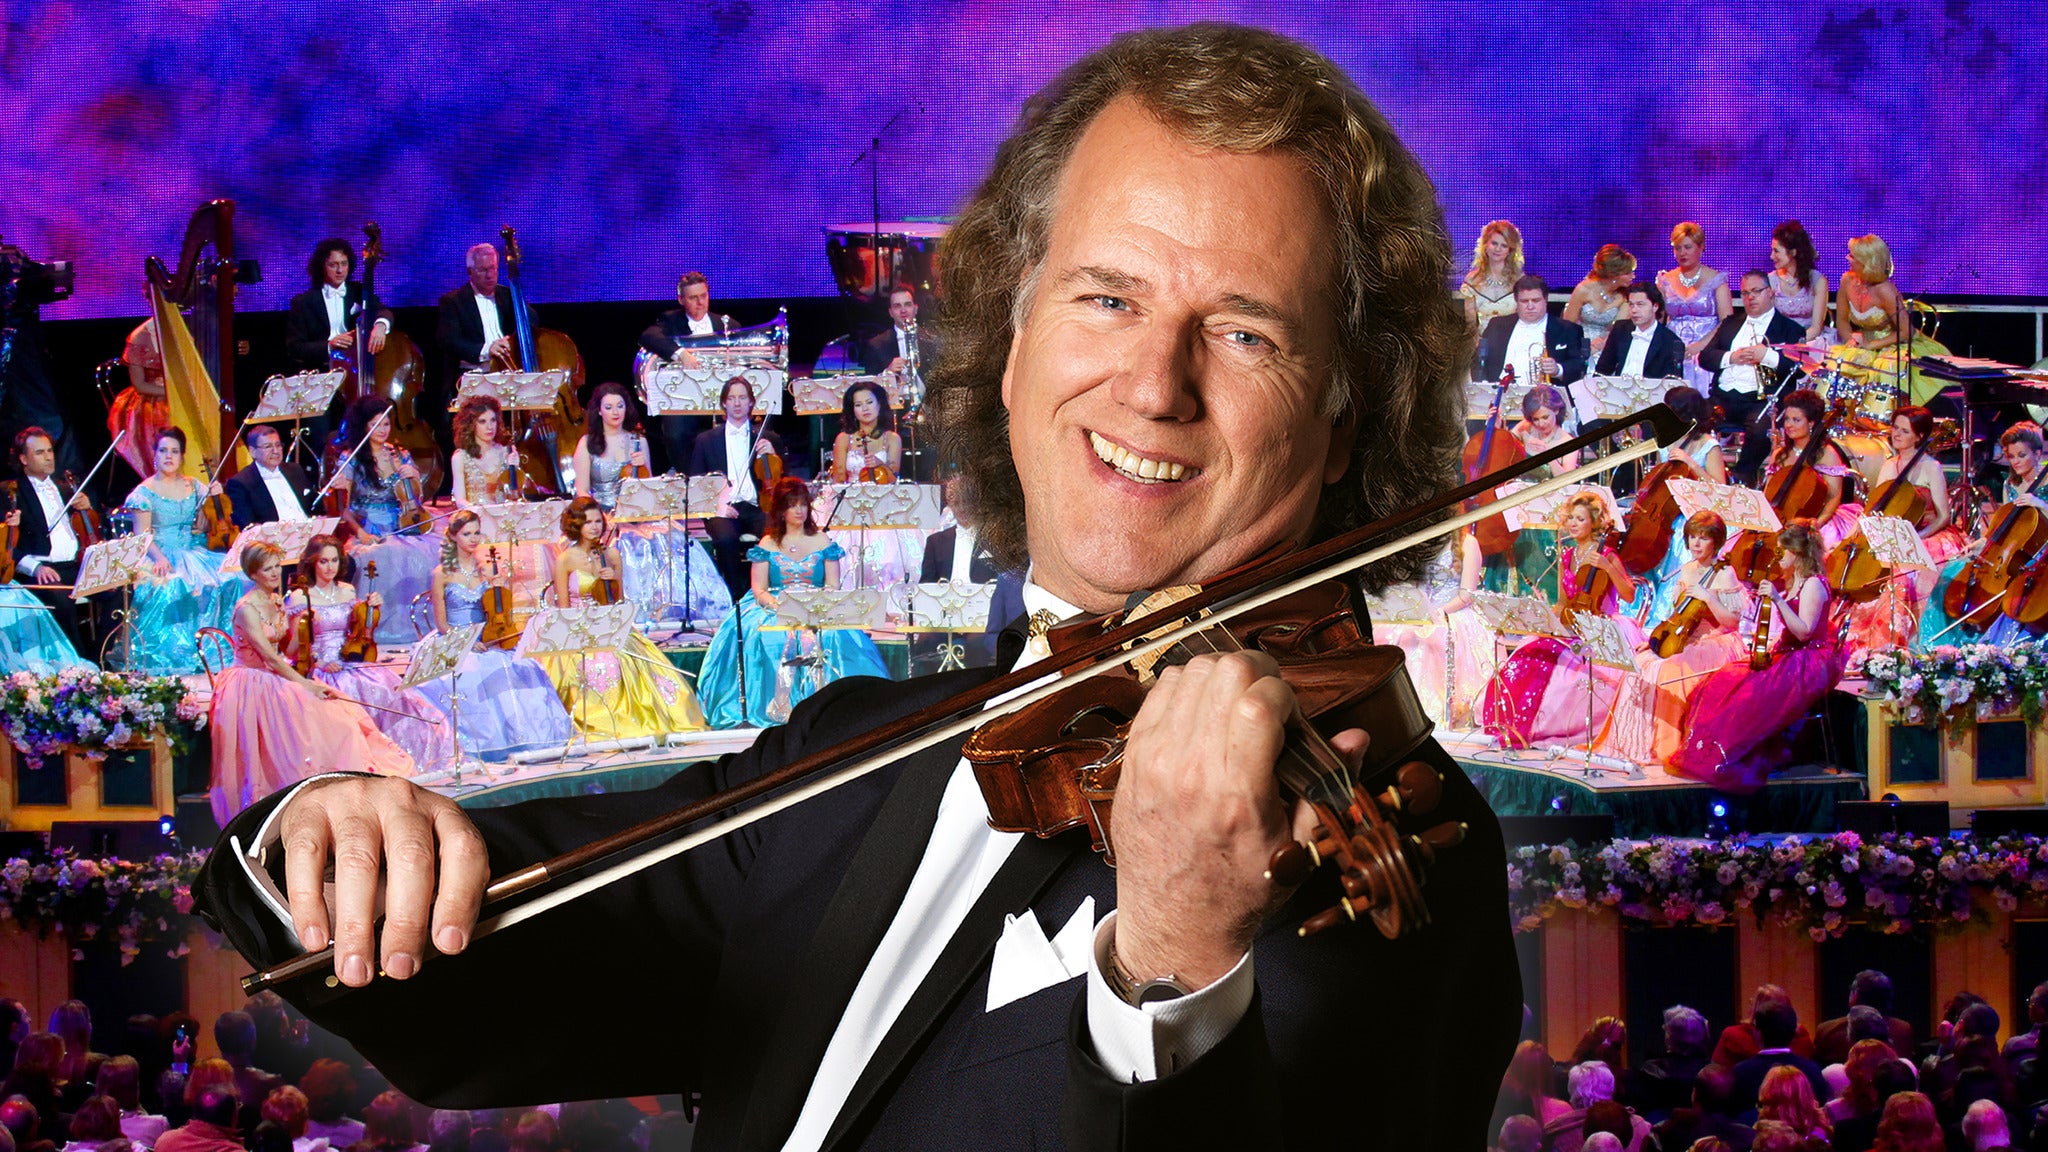 André Rieu and his Johann Strauss Orchestra